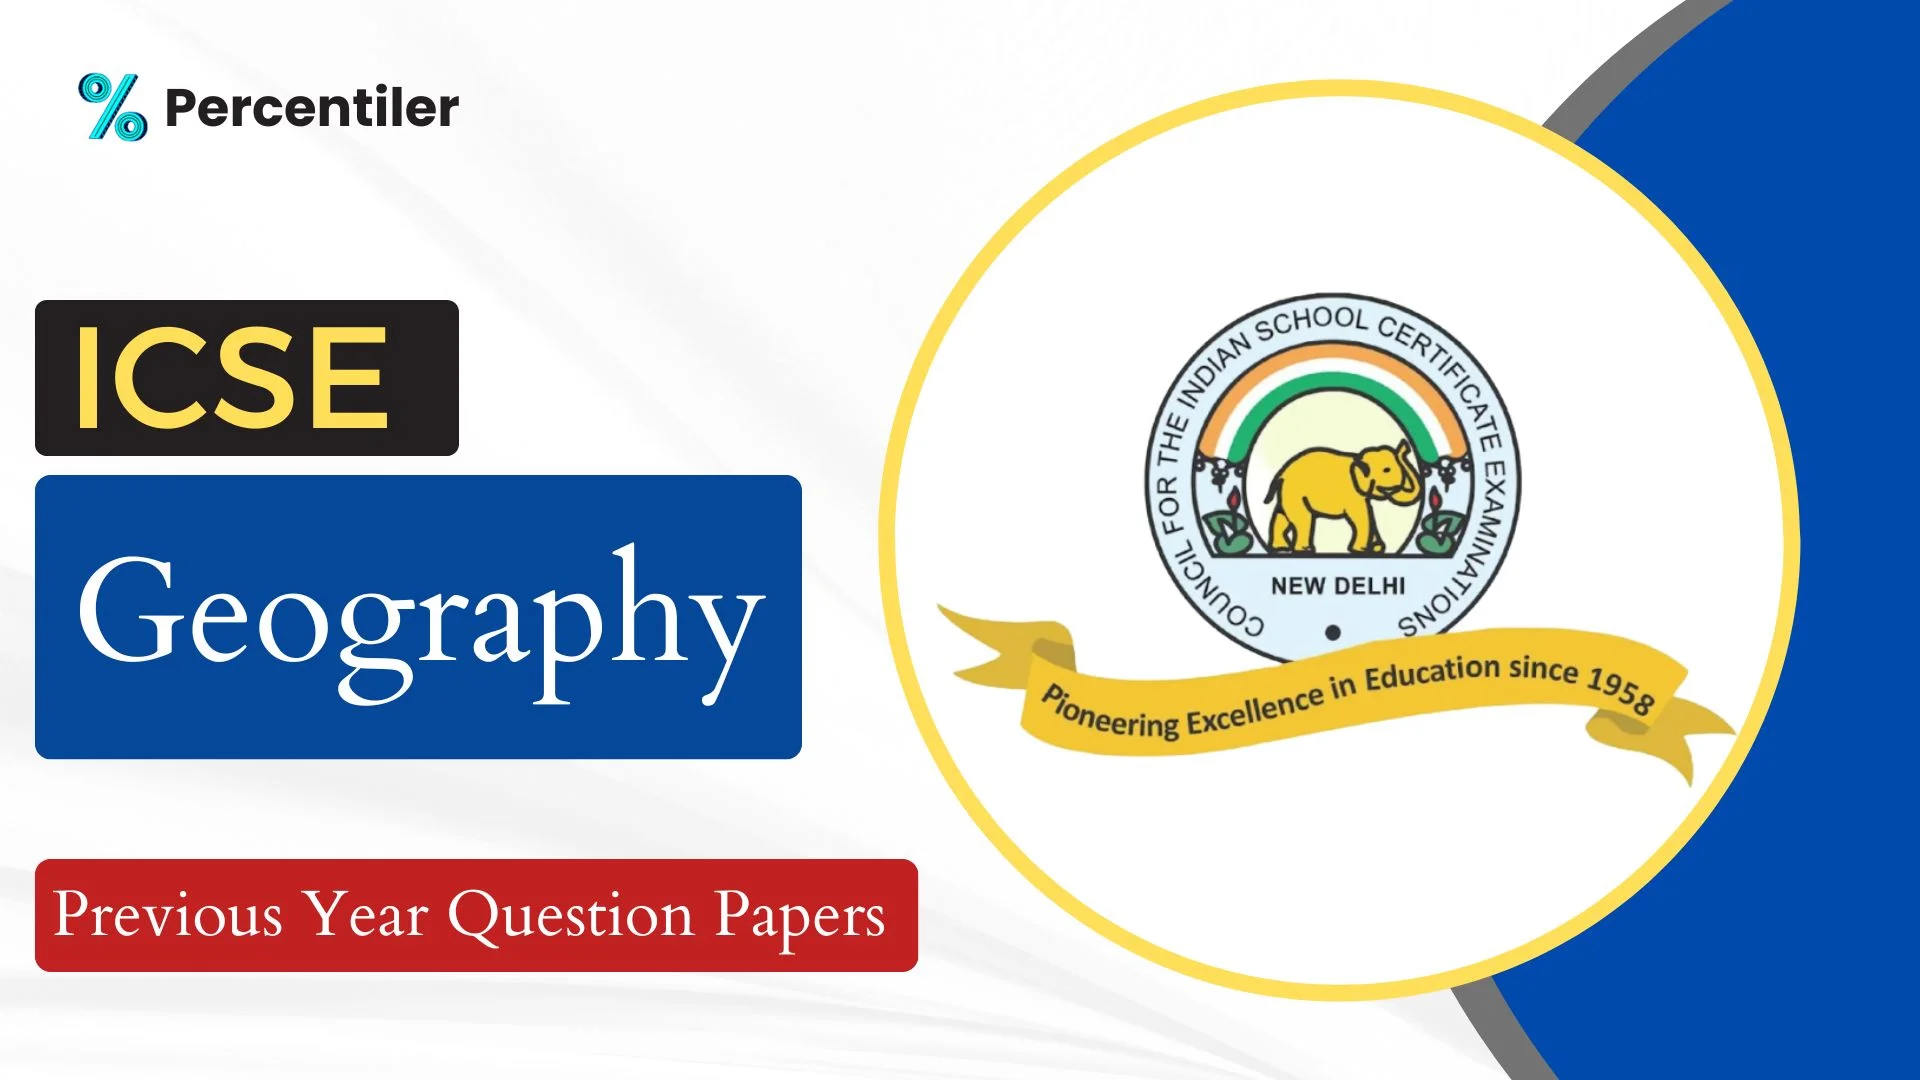 ICSE Geography Previous Year Question Papers